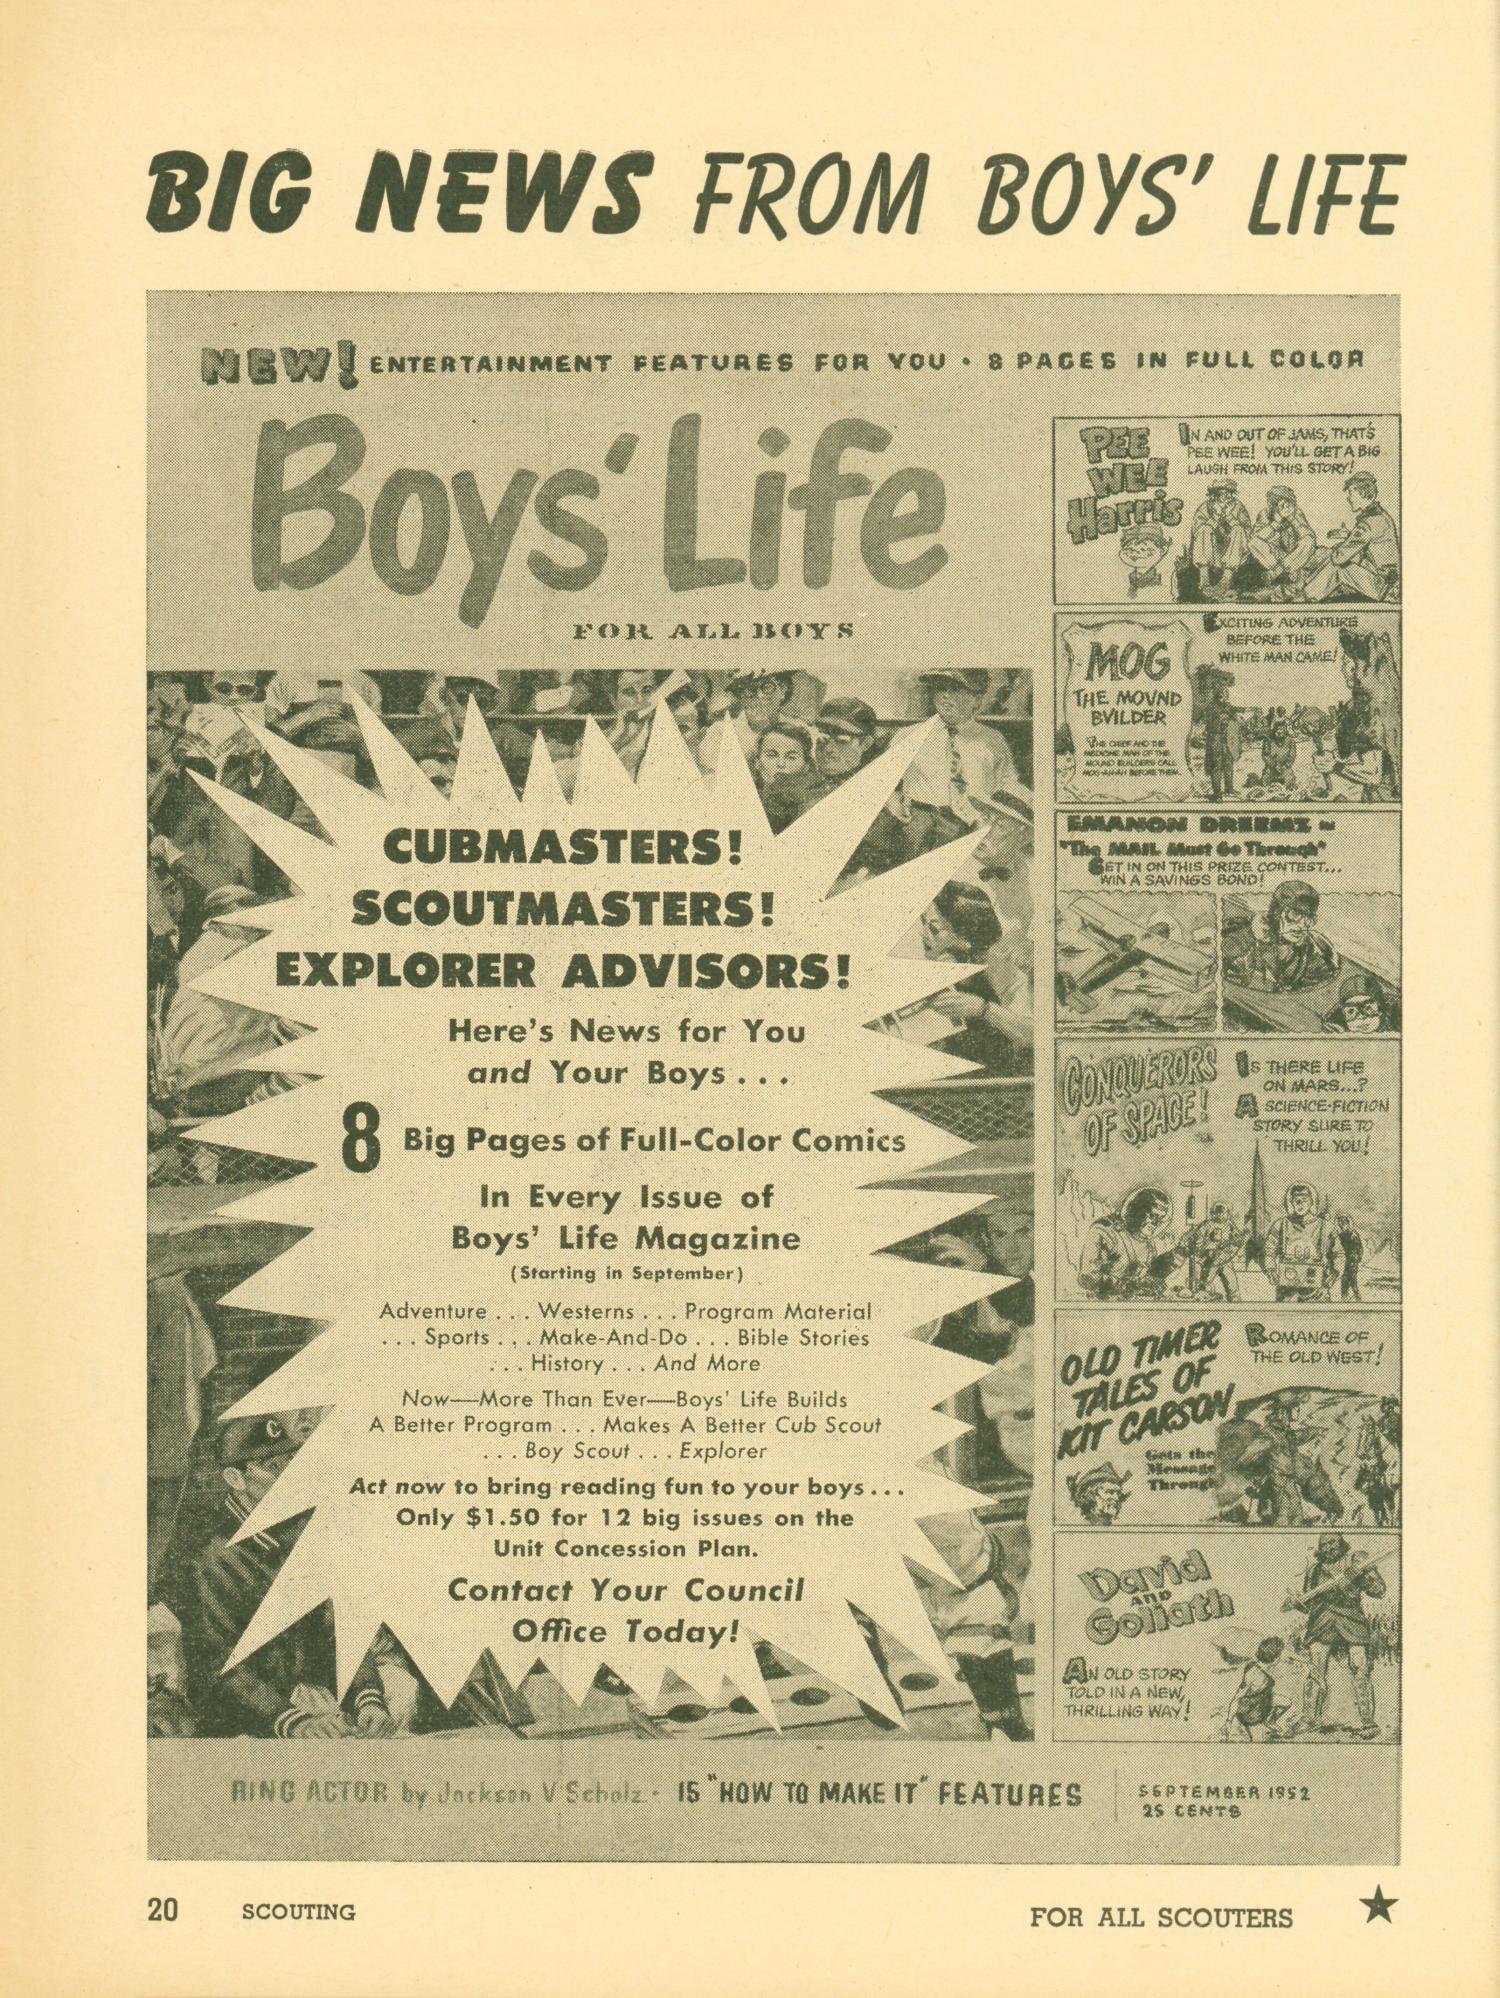 Scouting, Volume 40, Number 5, May 1952
                                                
                                                    20
                                                